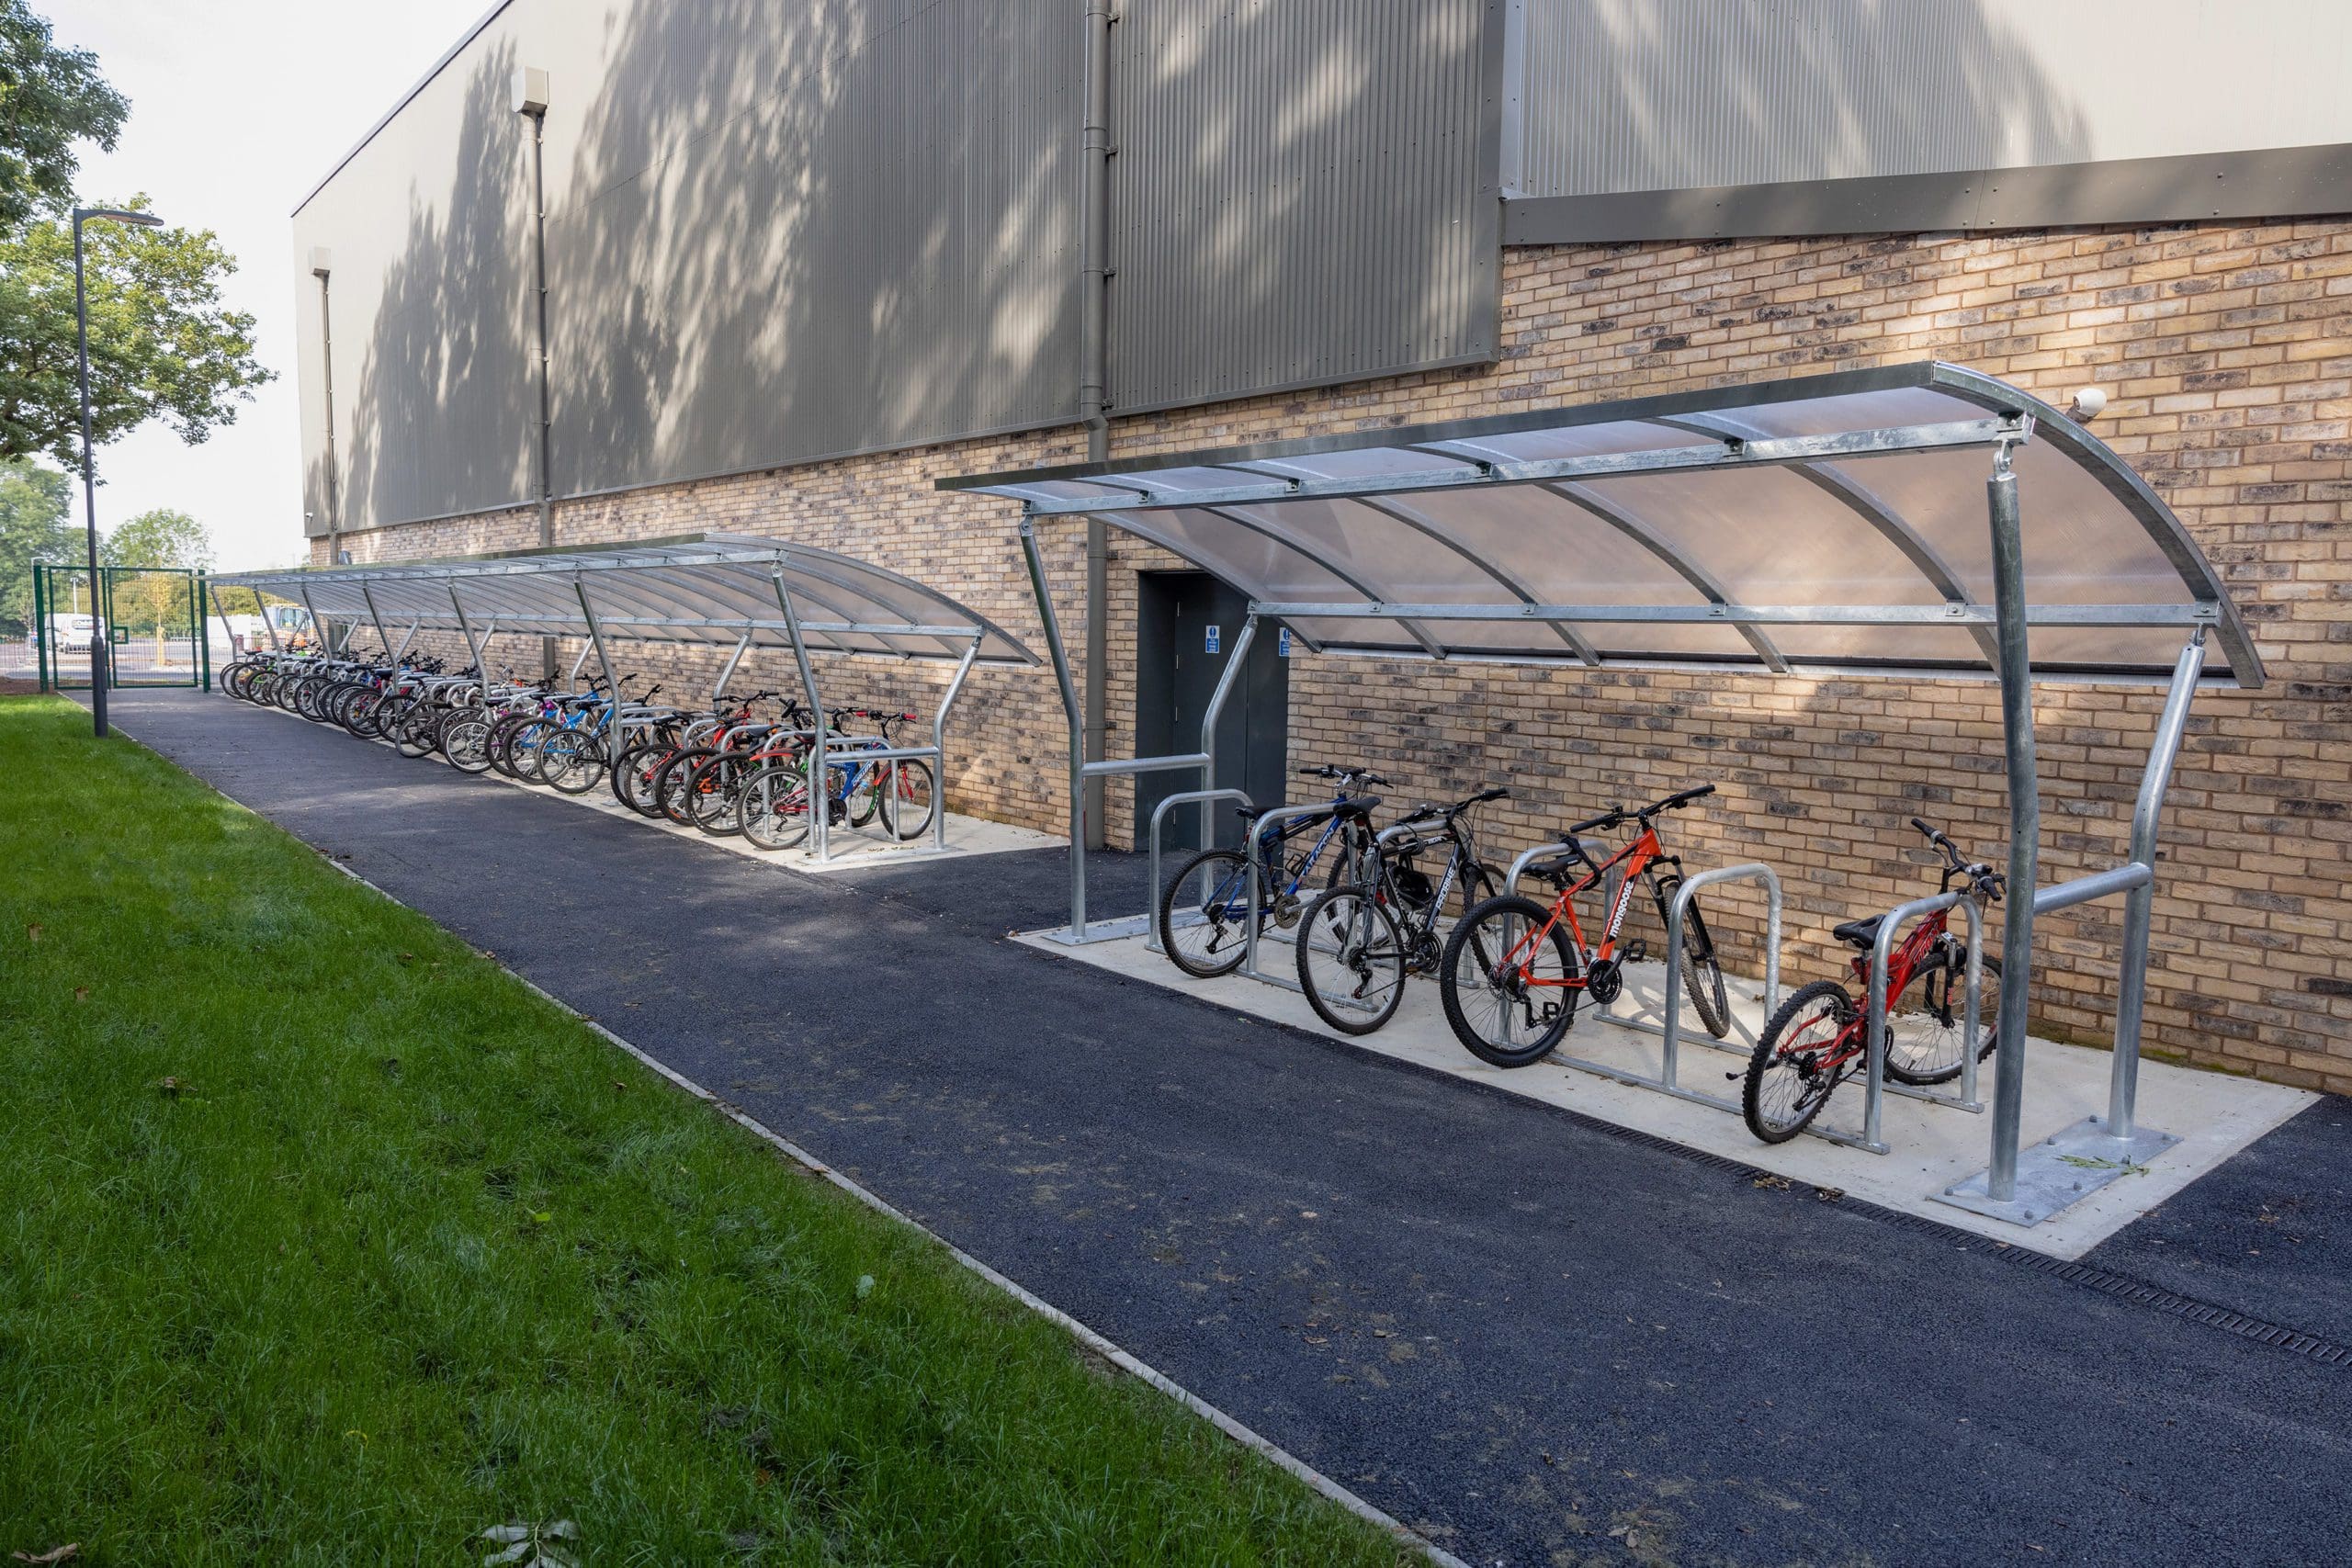 Row of metal outdoor bike racks with attached metal and see through canopy shelter